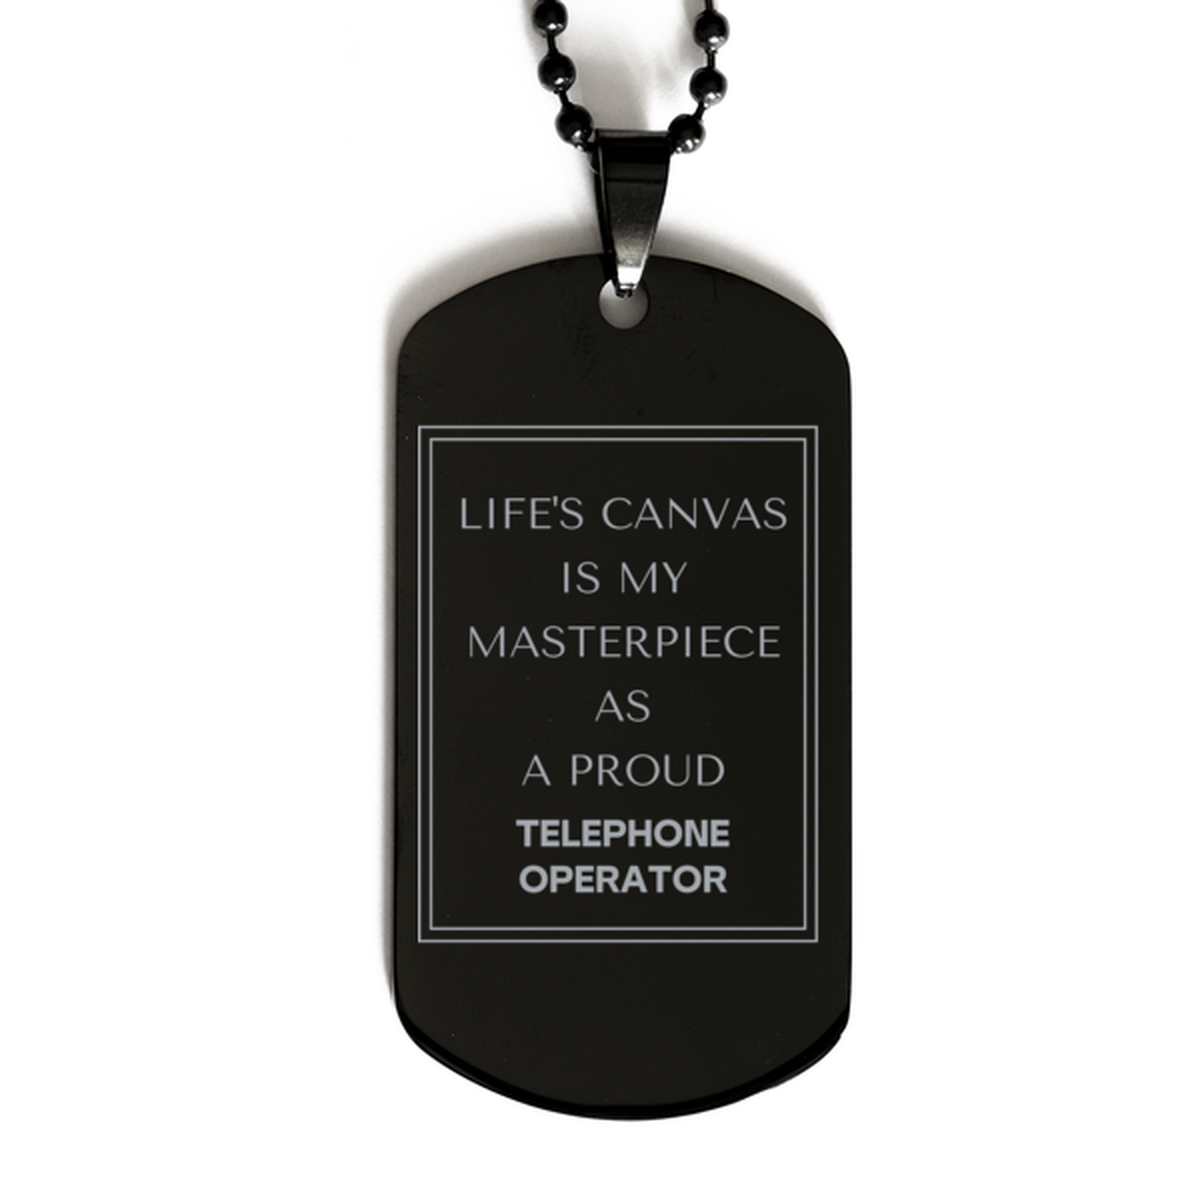 Proud Telephone Operator Gifts, Life's canvas is my masterpiece, Epic Birthday Christmas Unique Black Dog Tag For Telephone Operator, Coworkers, Men, Women, Friends